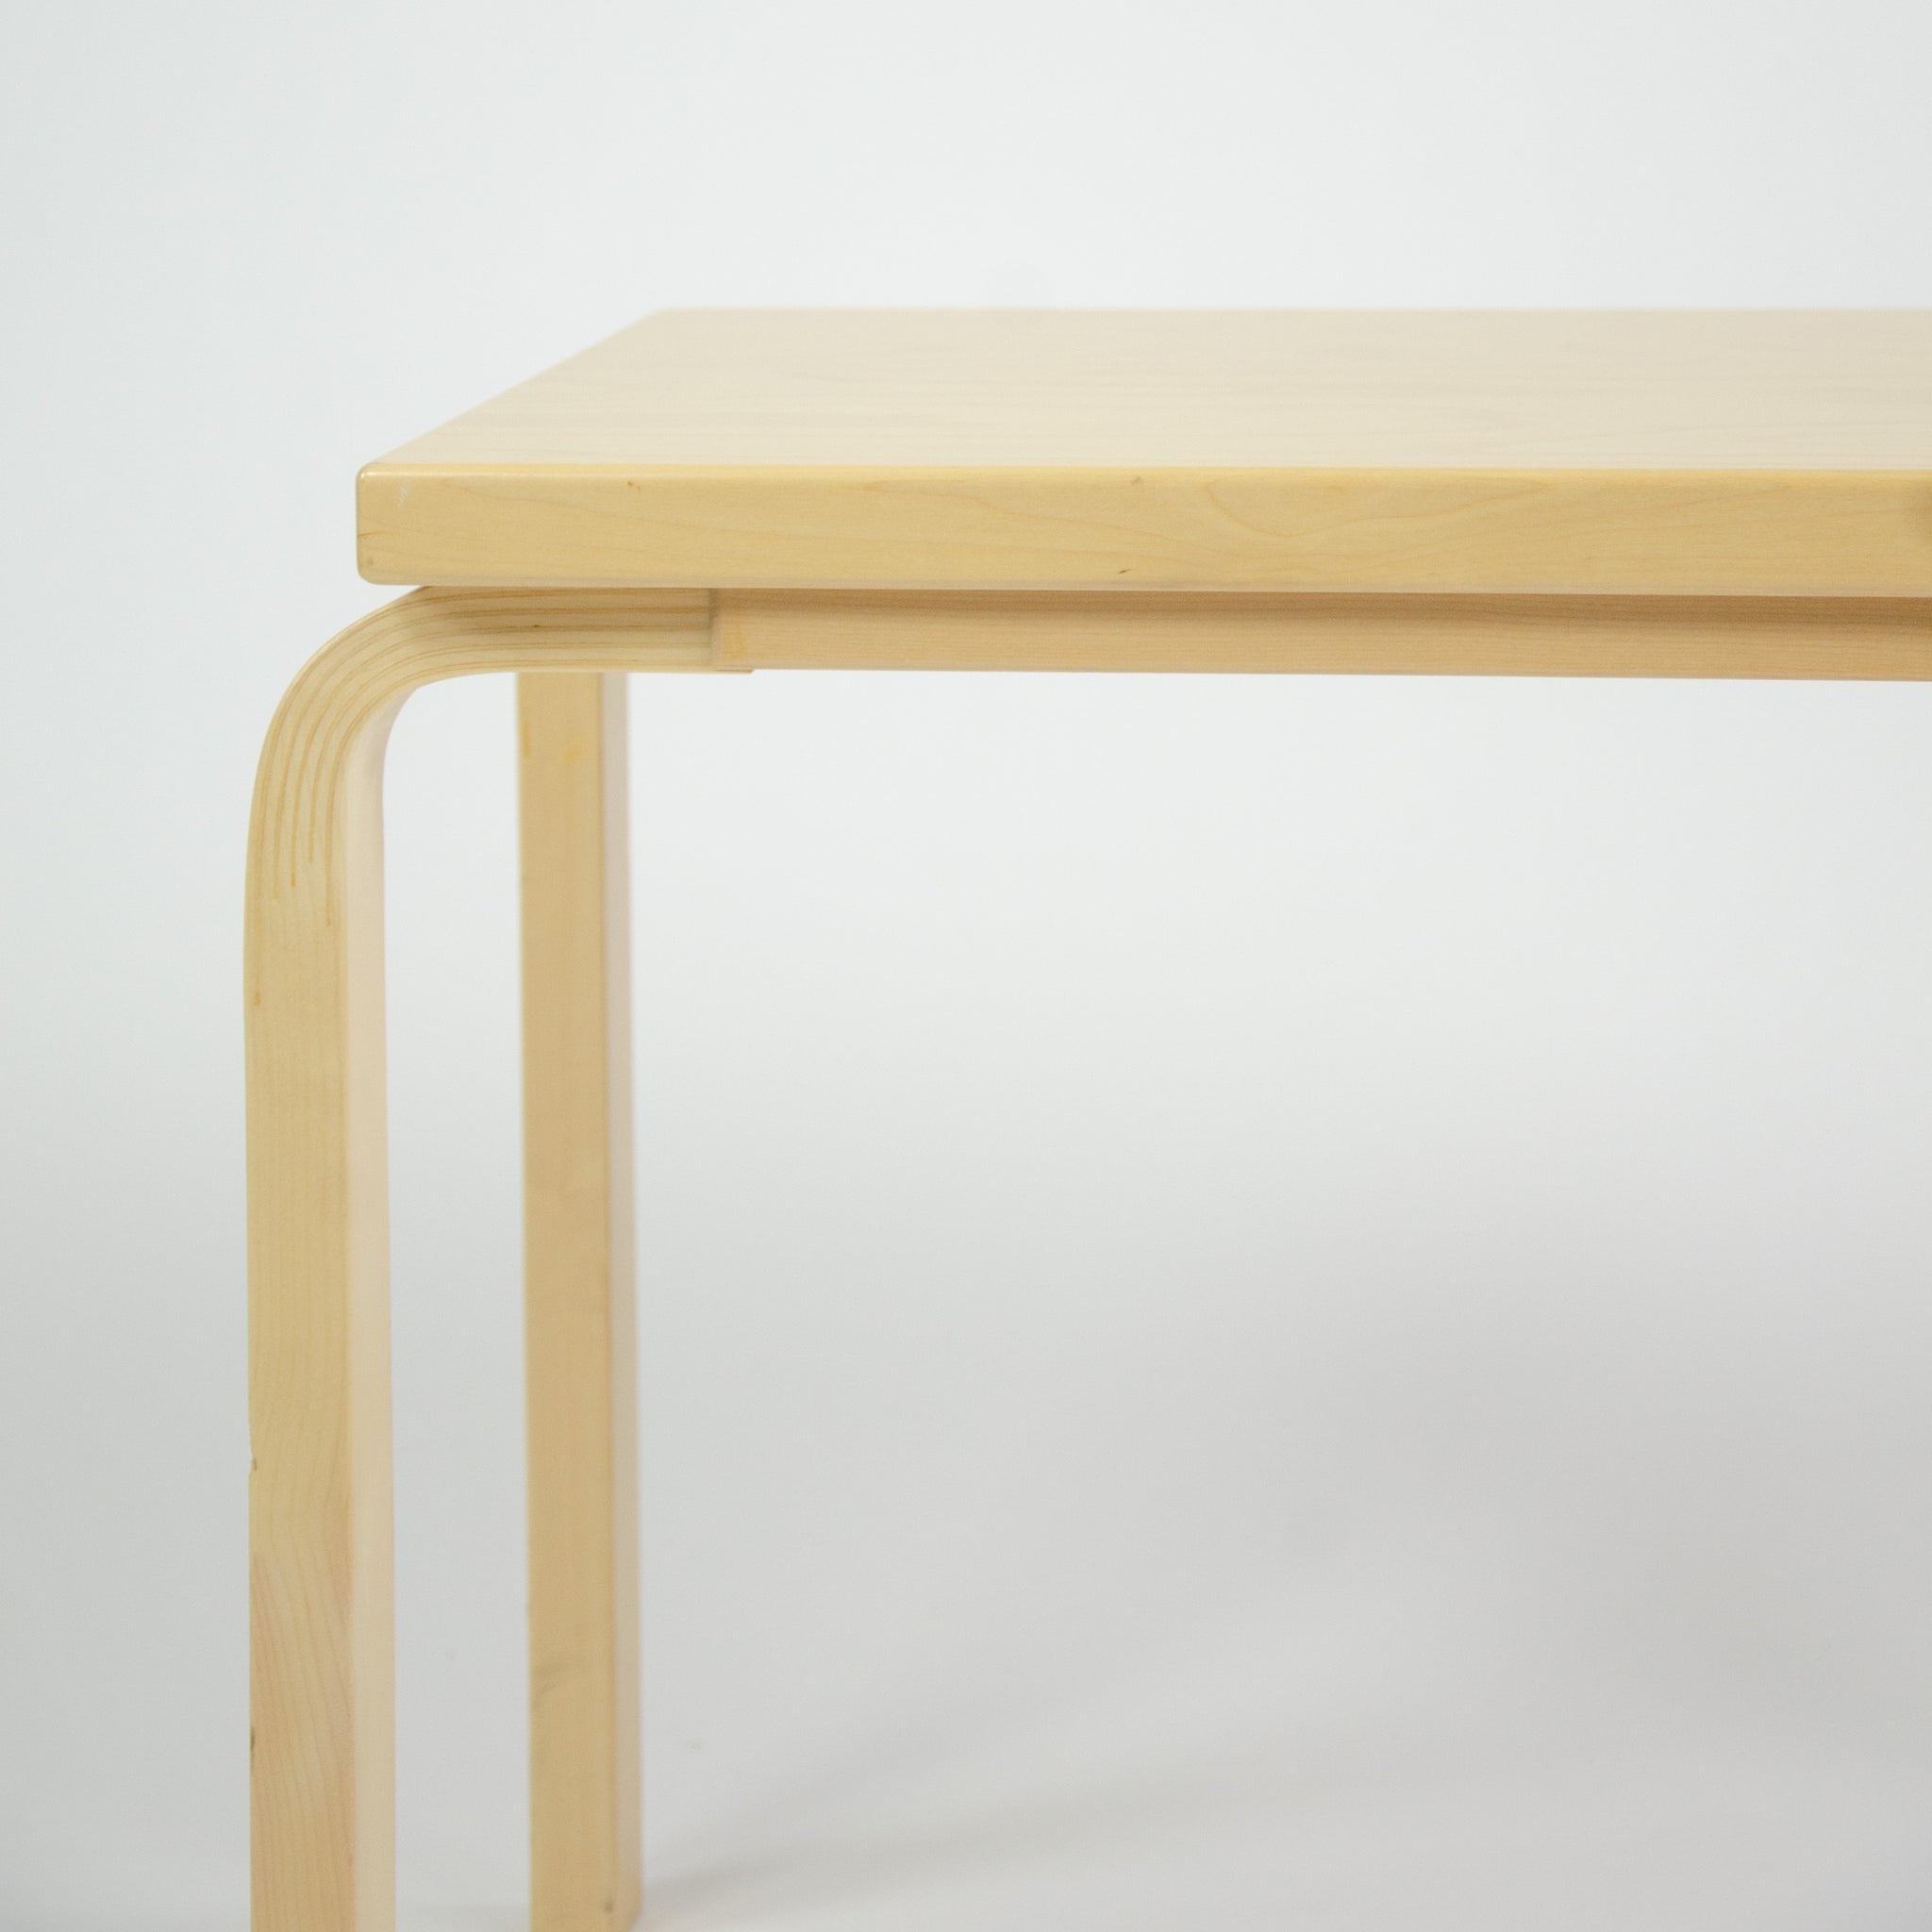 SOLD Alvar Aalto Nesting Table 88 by Artek Birch Made In Finland (1x available)